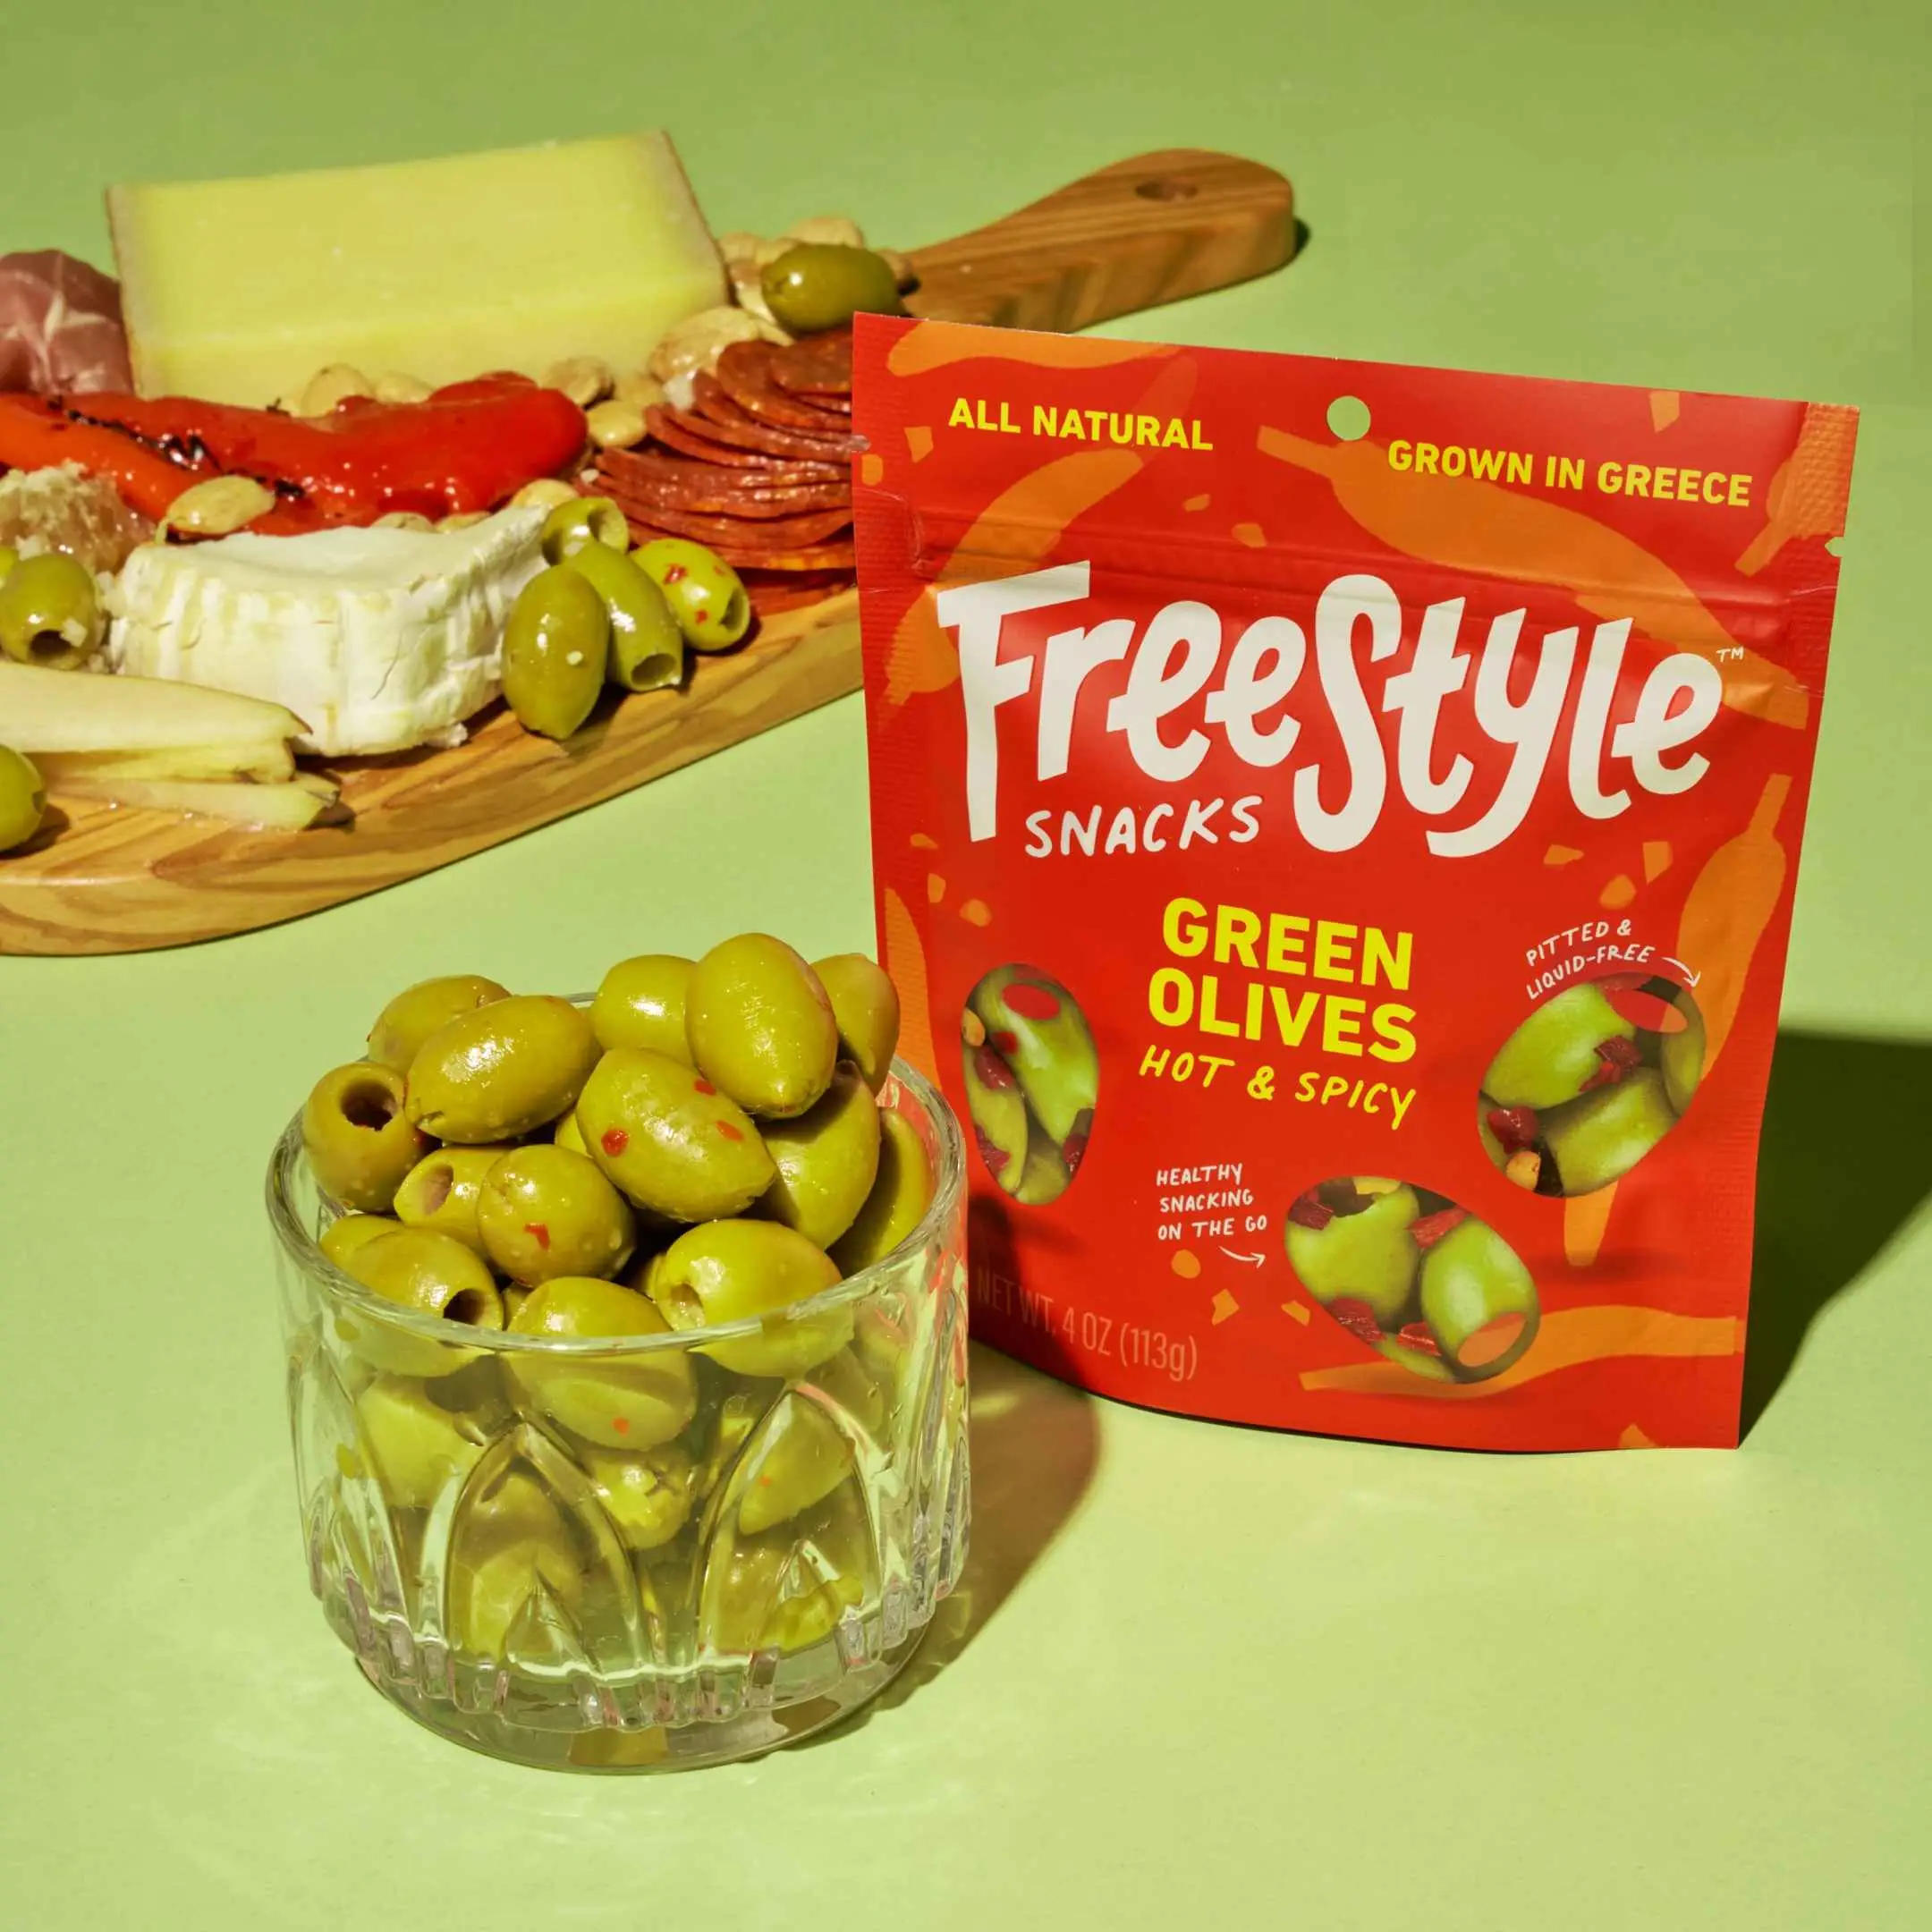 Green Olives - Hot & Spicy Delivery